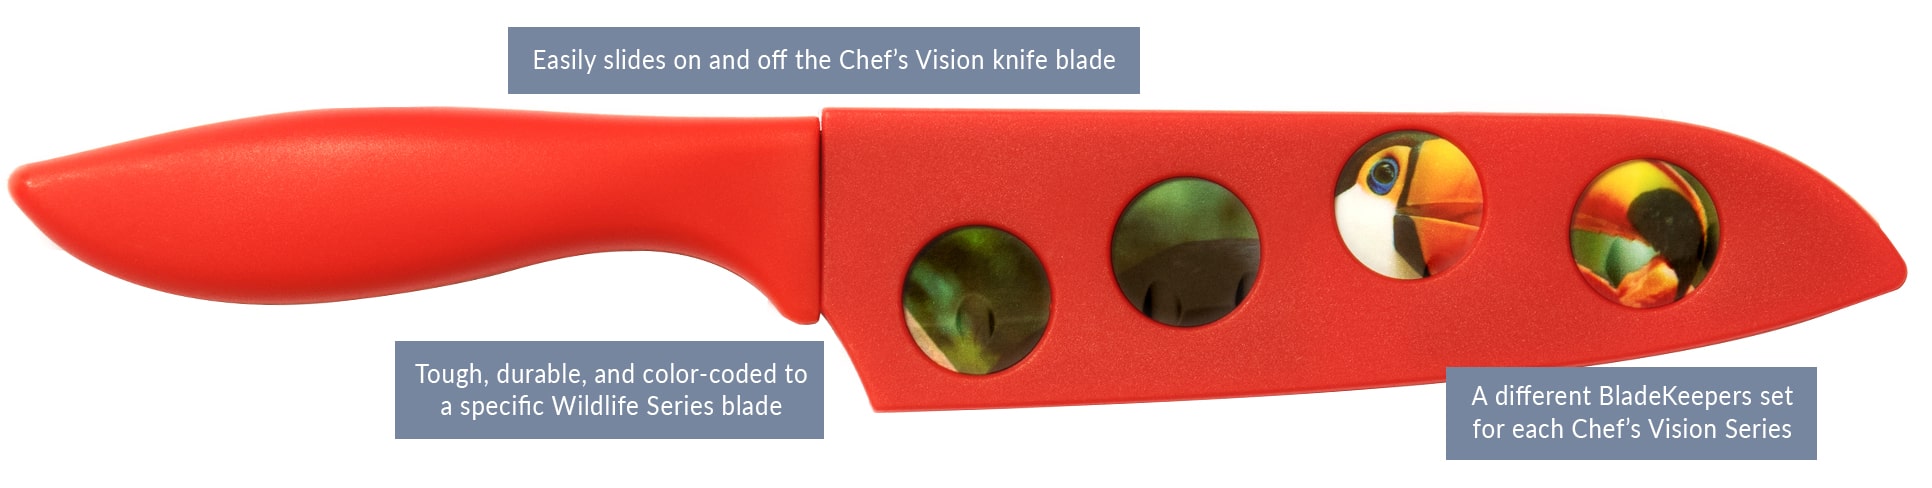 Chef's Vision Knife Set Review - Almost too Pretty to use